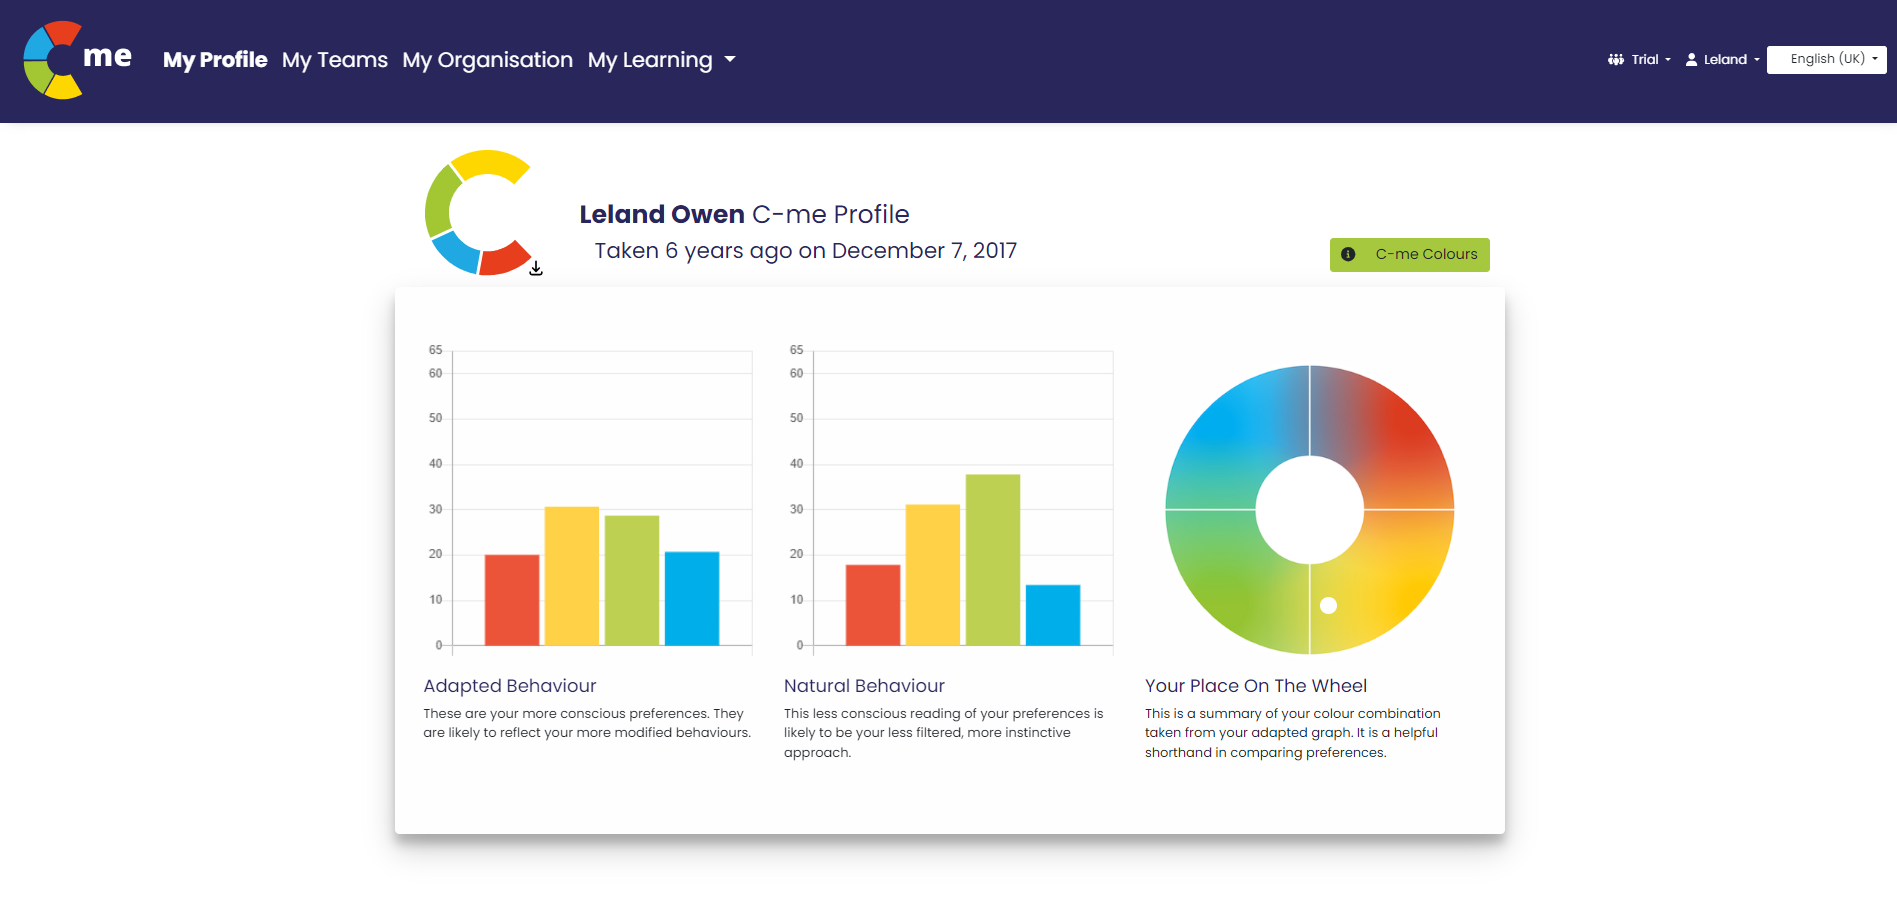 This is your C-me home page which outlines your adapted and natural graph alongside your place on the colour wheel.